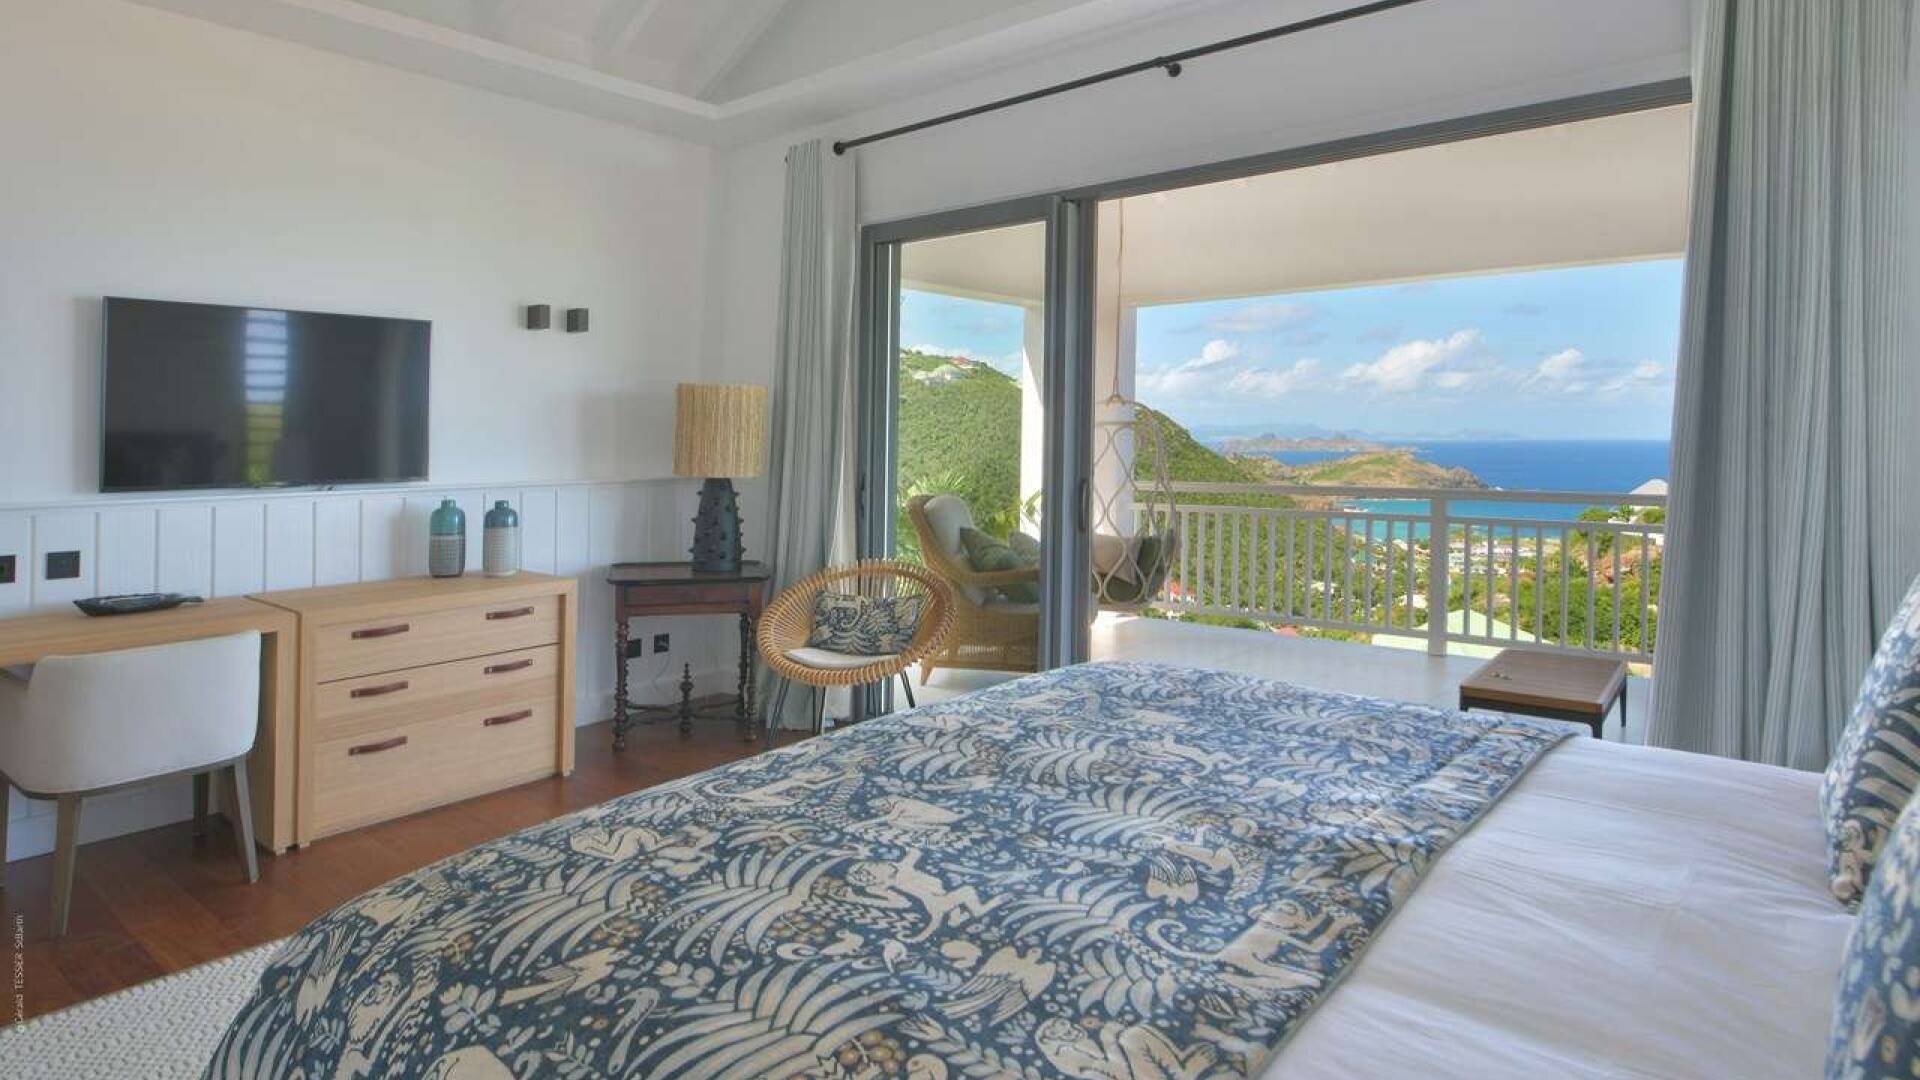 Bedroom at WV RMN, Flamands, St. Barthelemy